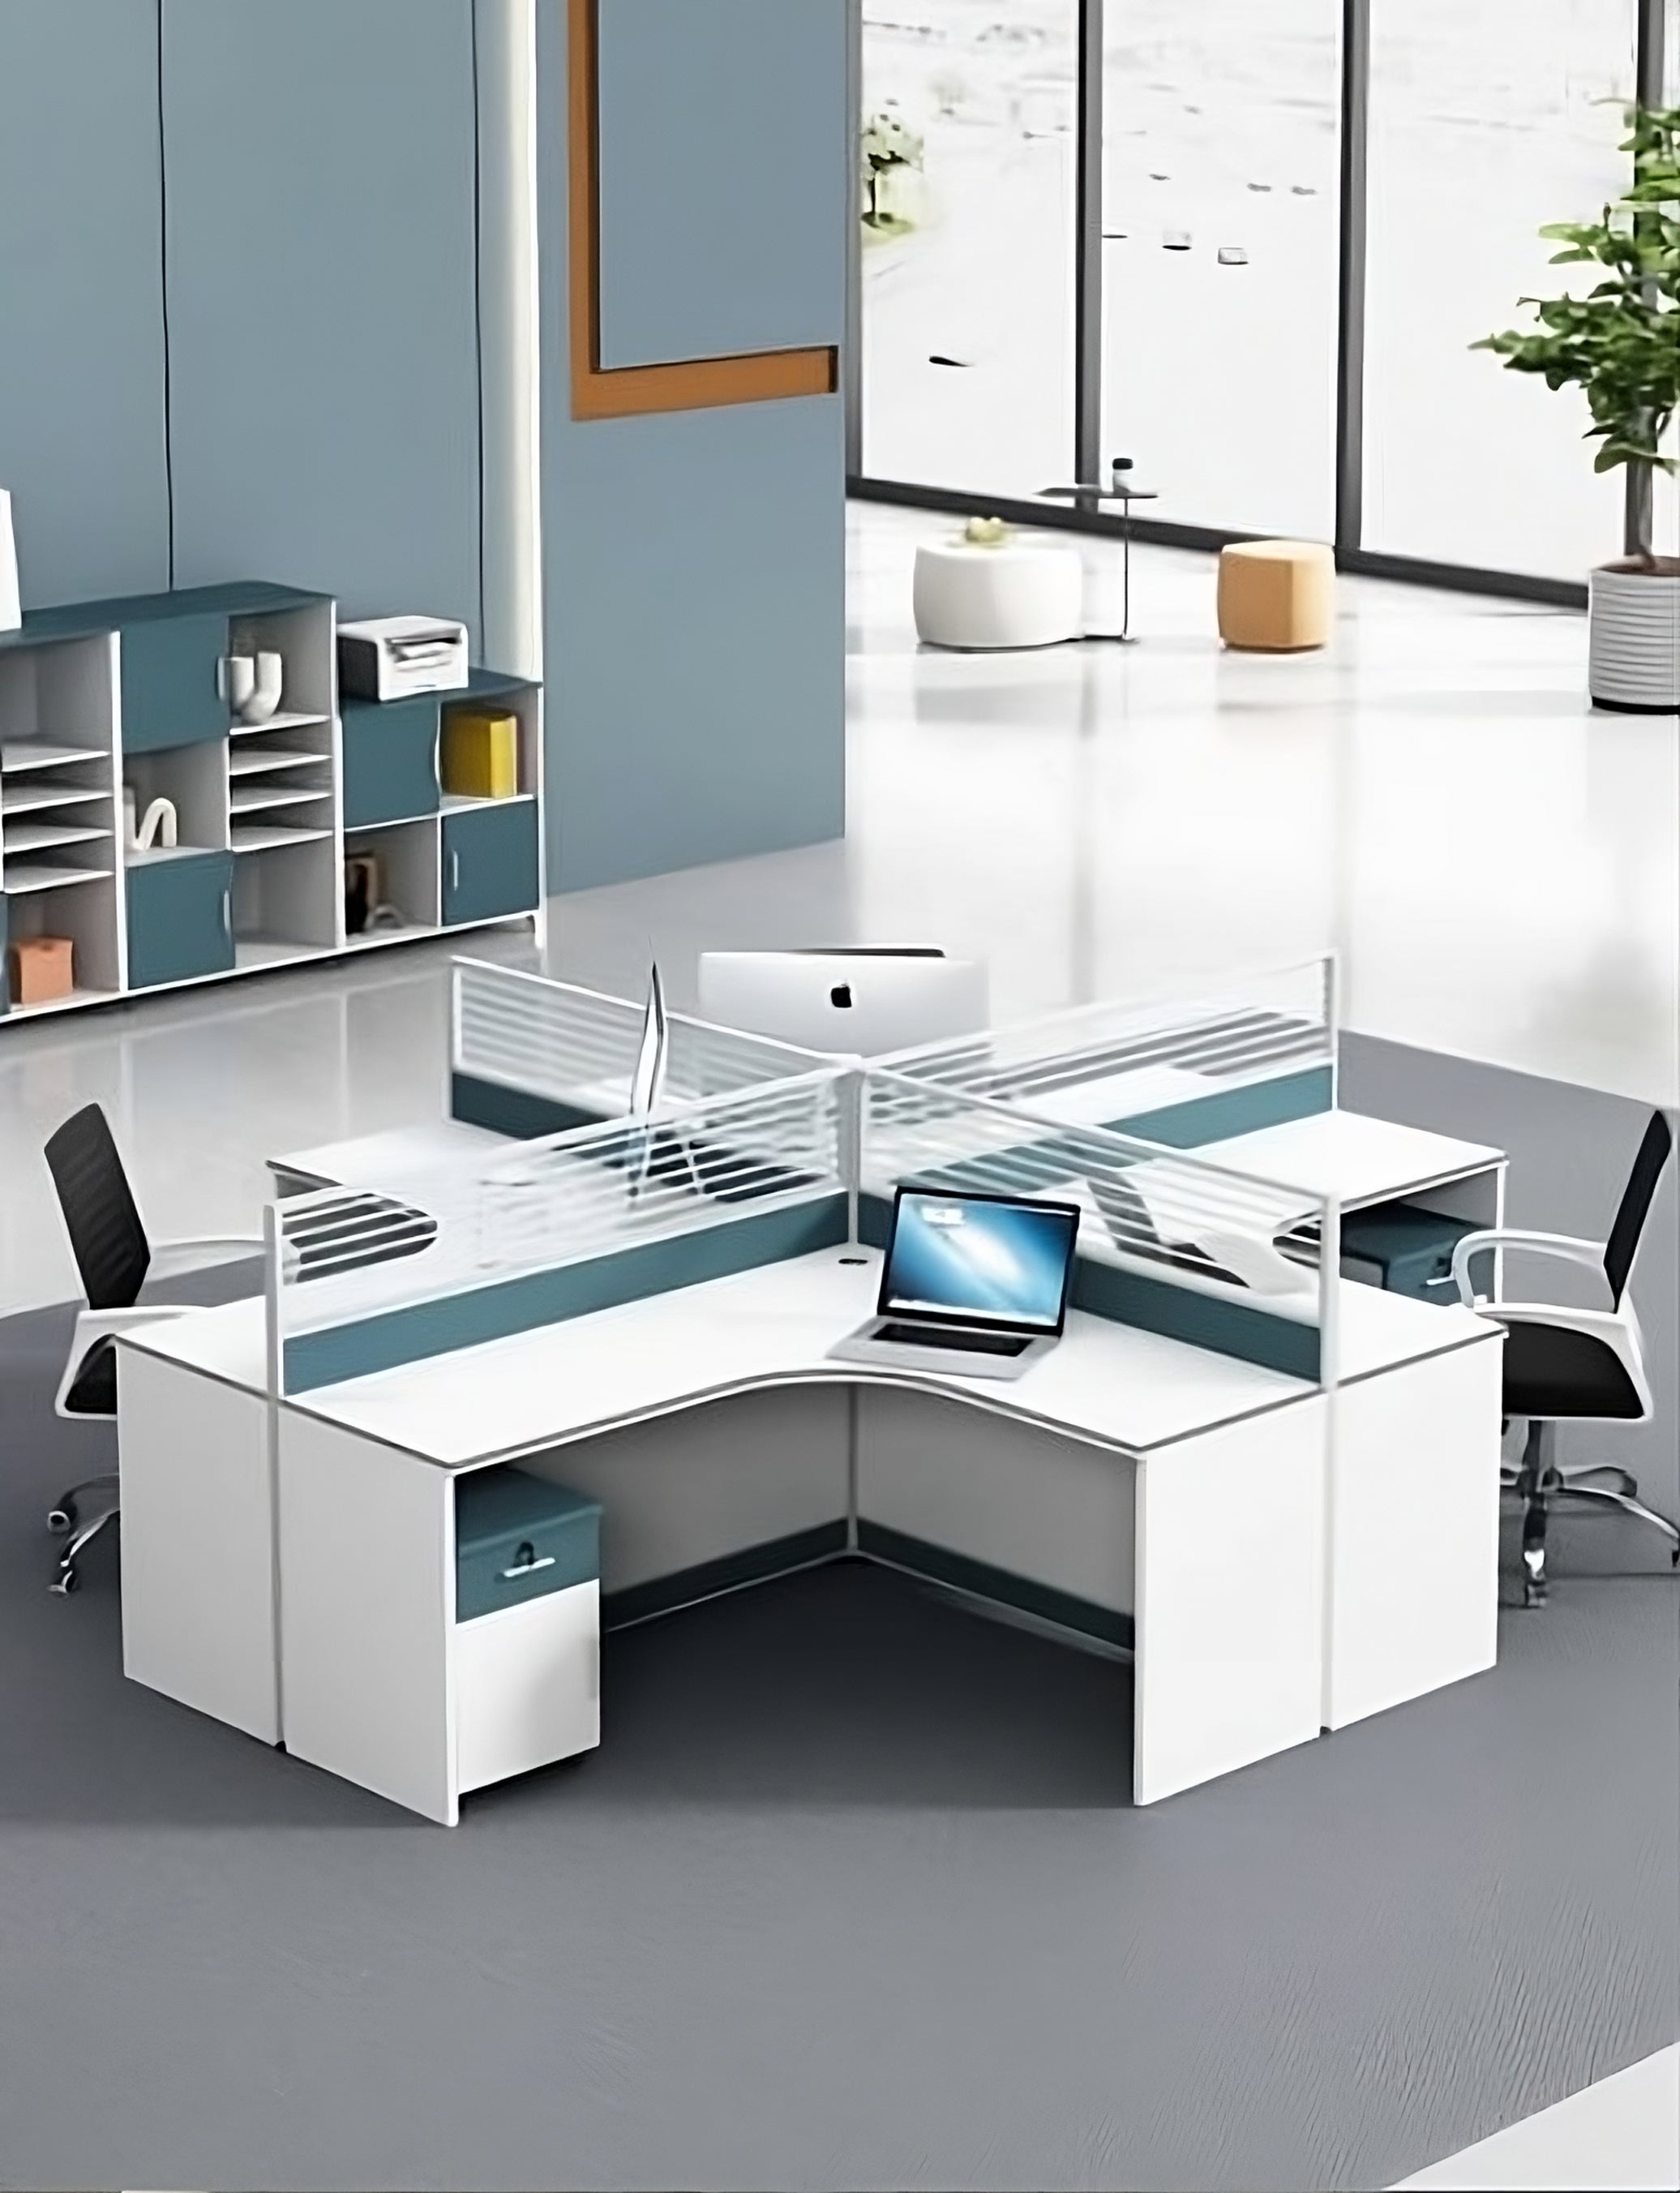 Modern 4 person Workstatio with Privacy Dividers